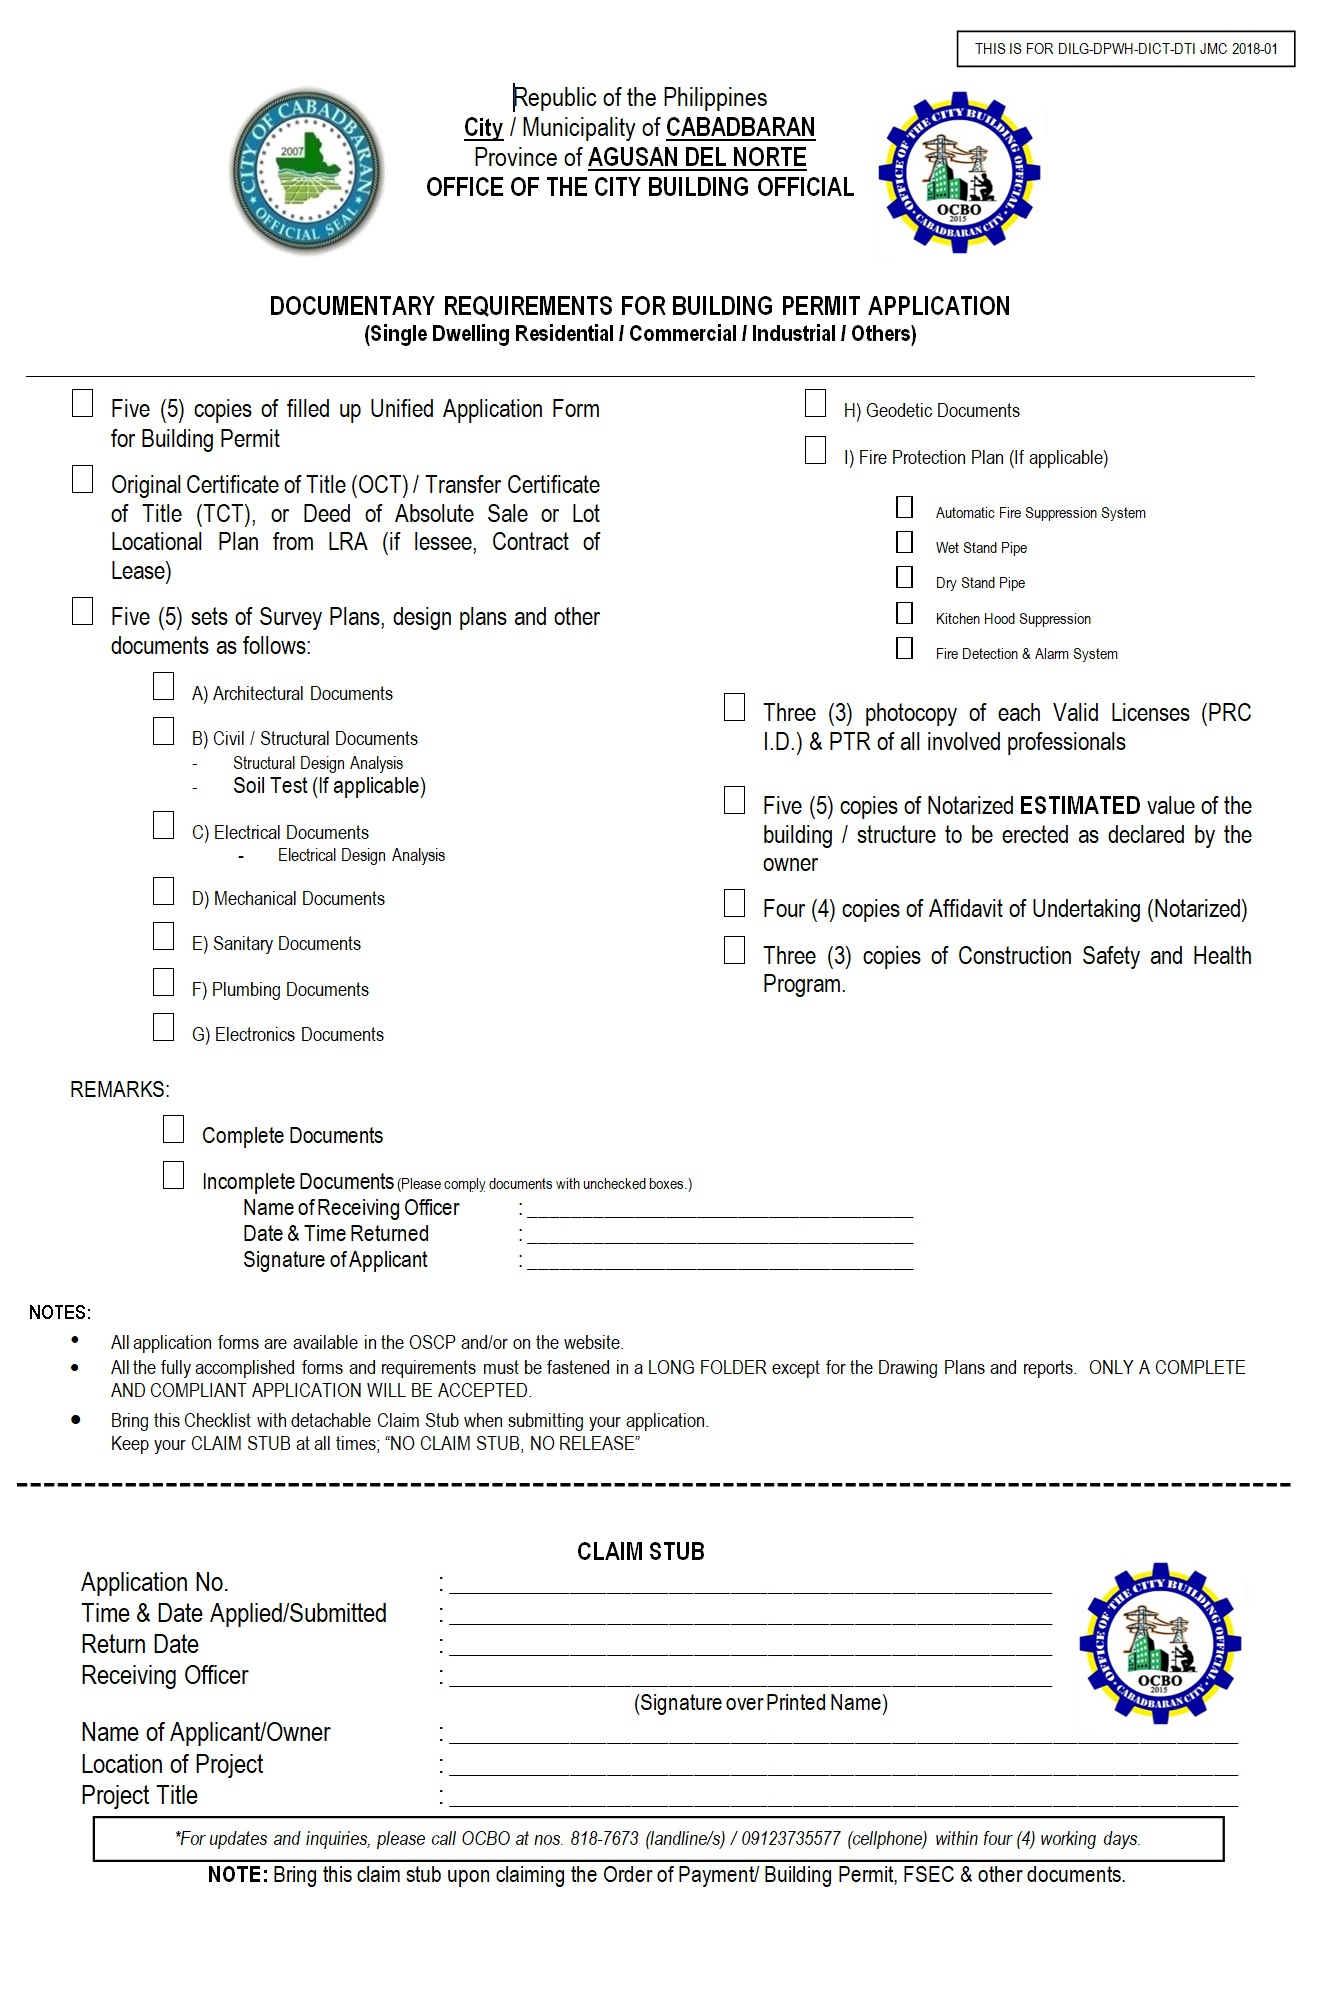 Building Permit Downloadable Forms  Cabadbaran City For Building Permit Checklist Template With Regard To Building Permit Checklist Template